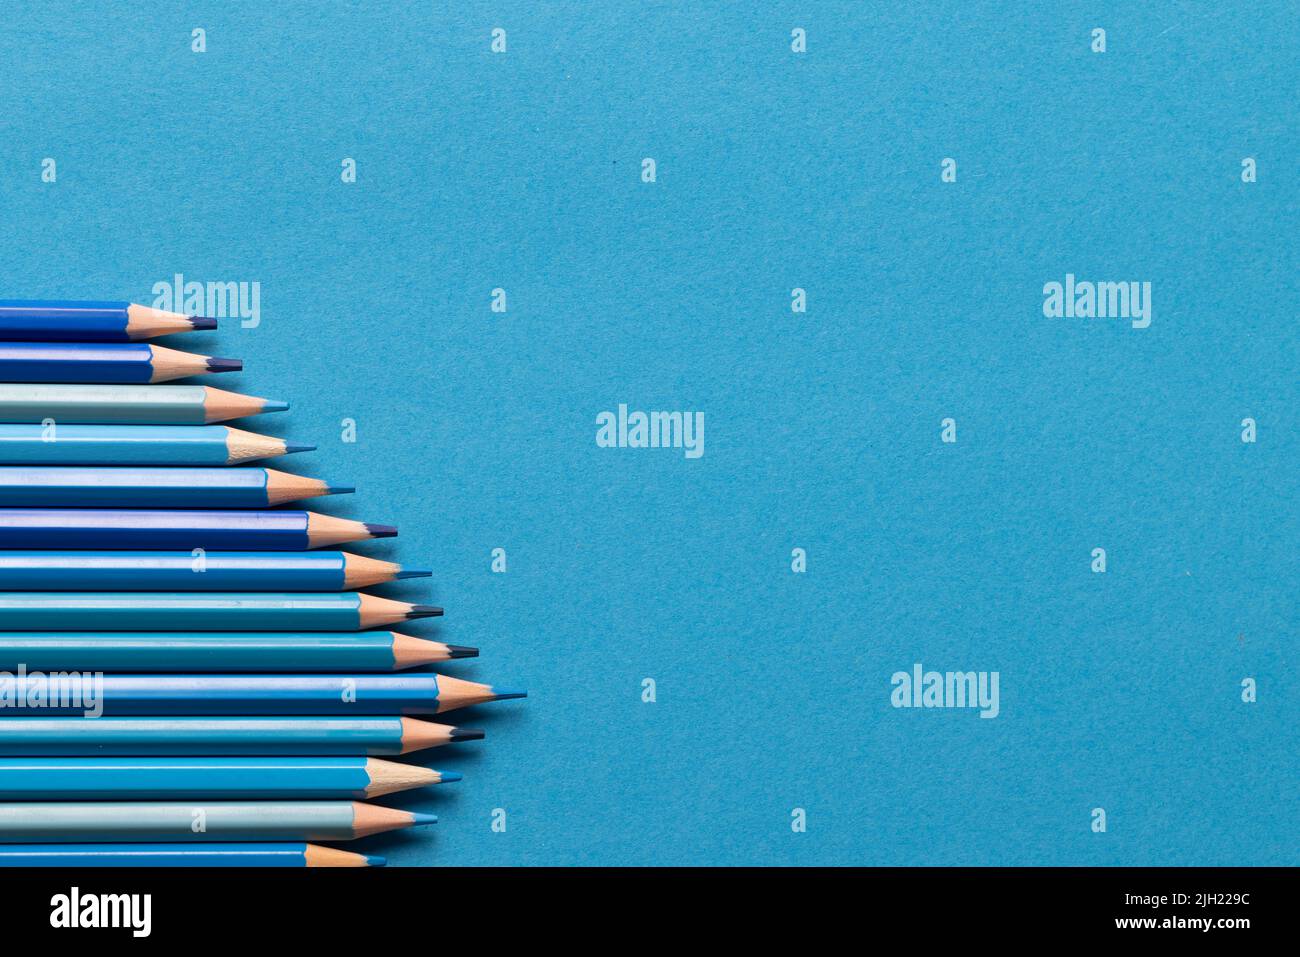 Image of row of different shades of blue crayons on blue background Stock Photo